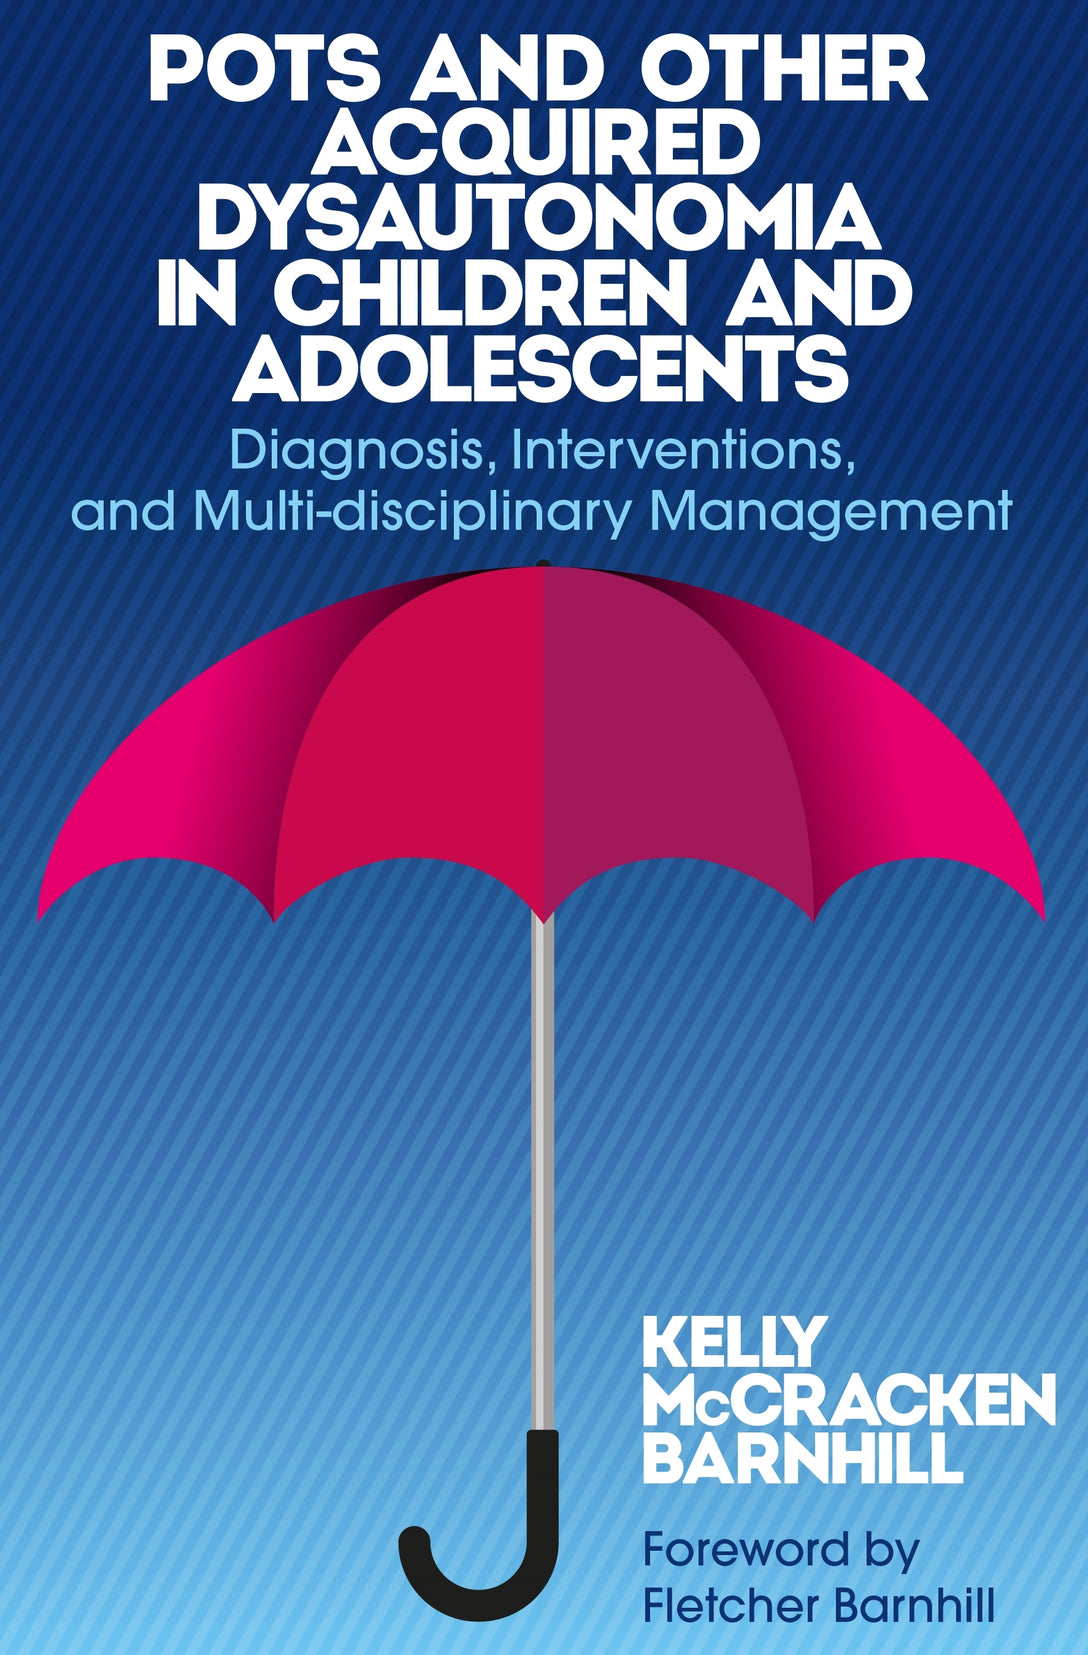 POTS and Other Acquired Dysautonomia in Children and Adolescents by Kelly McCracken Barnhill, Fletcher Barnhill